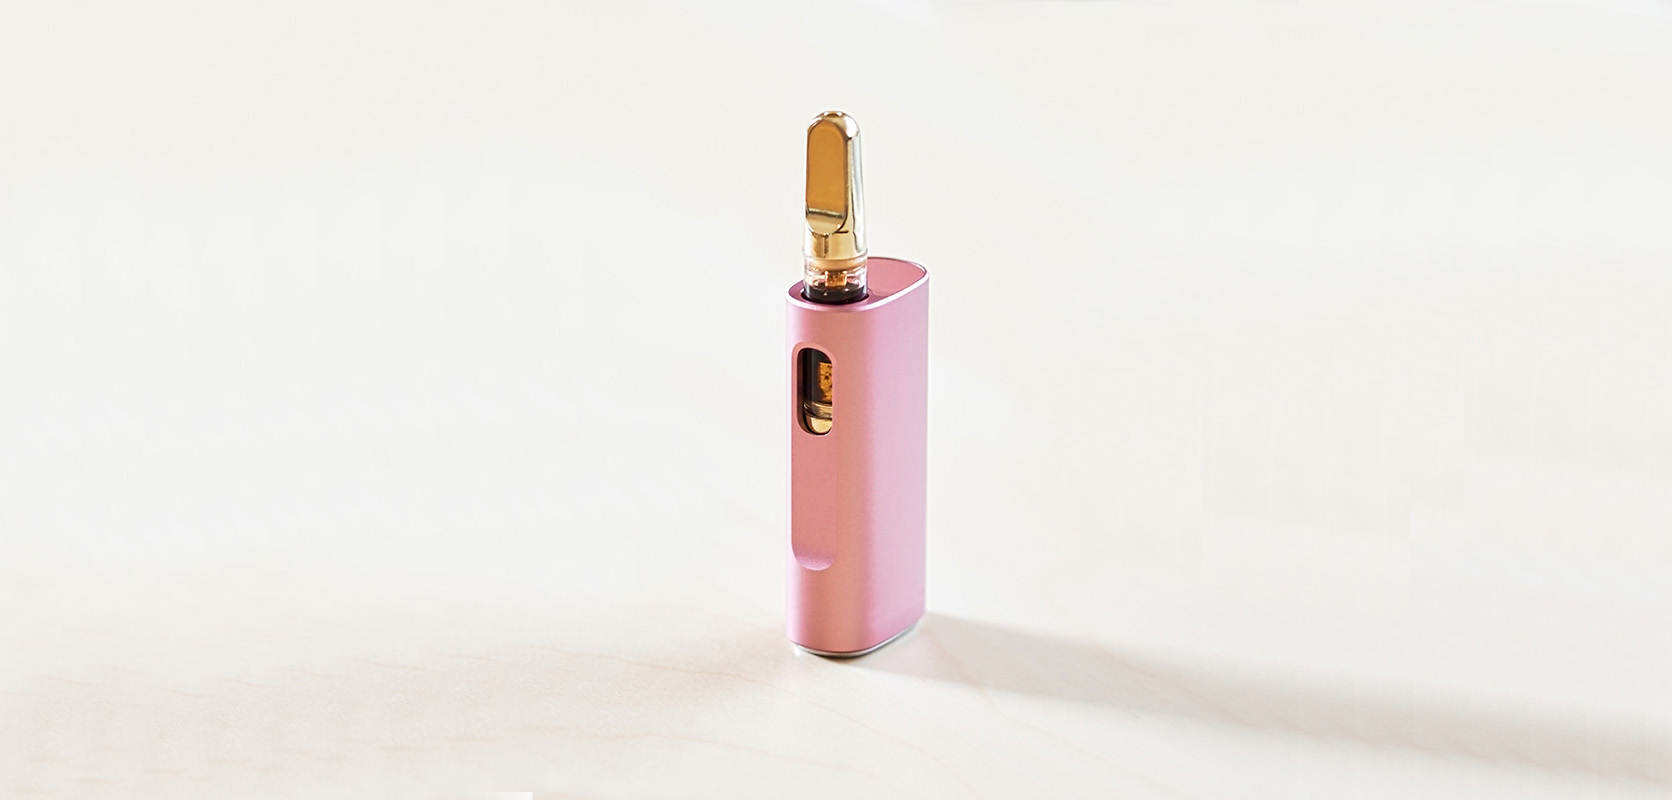 Pink vape pen for cannabis at online dispensary Canada Low Price Bud. weed vape pen canada. online weed dispensary.